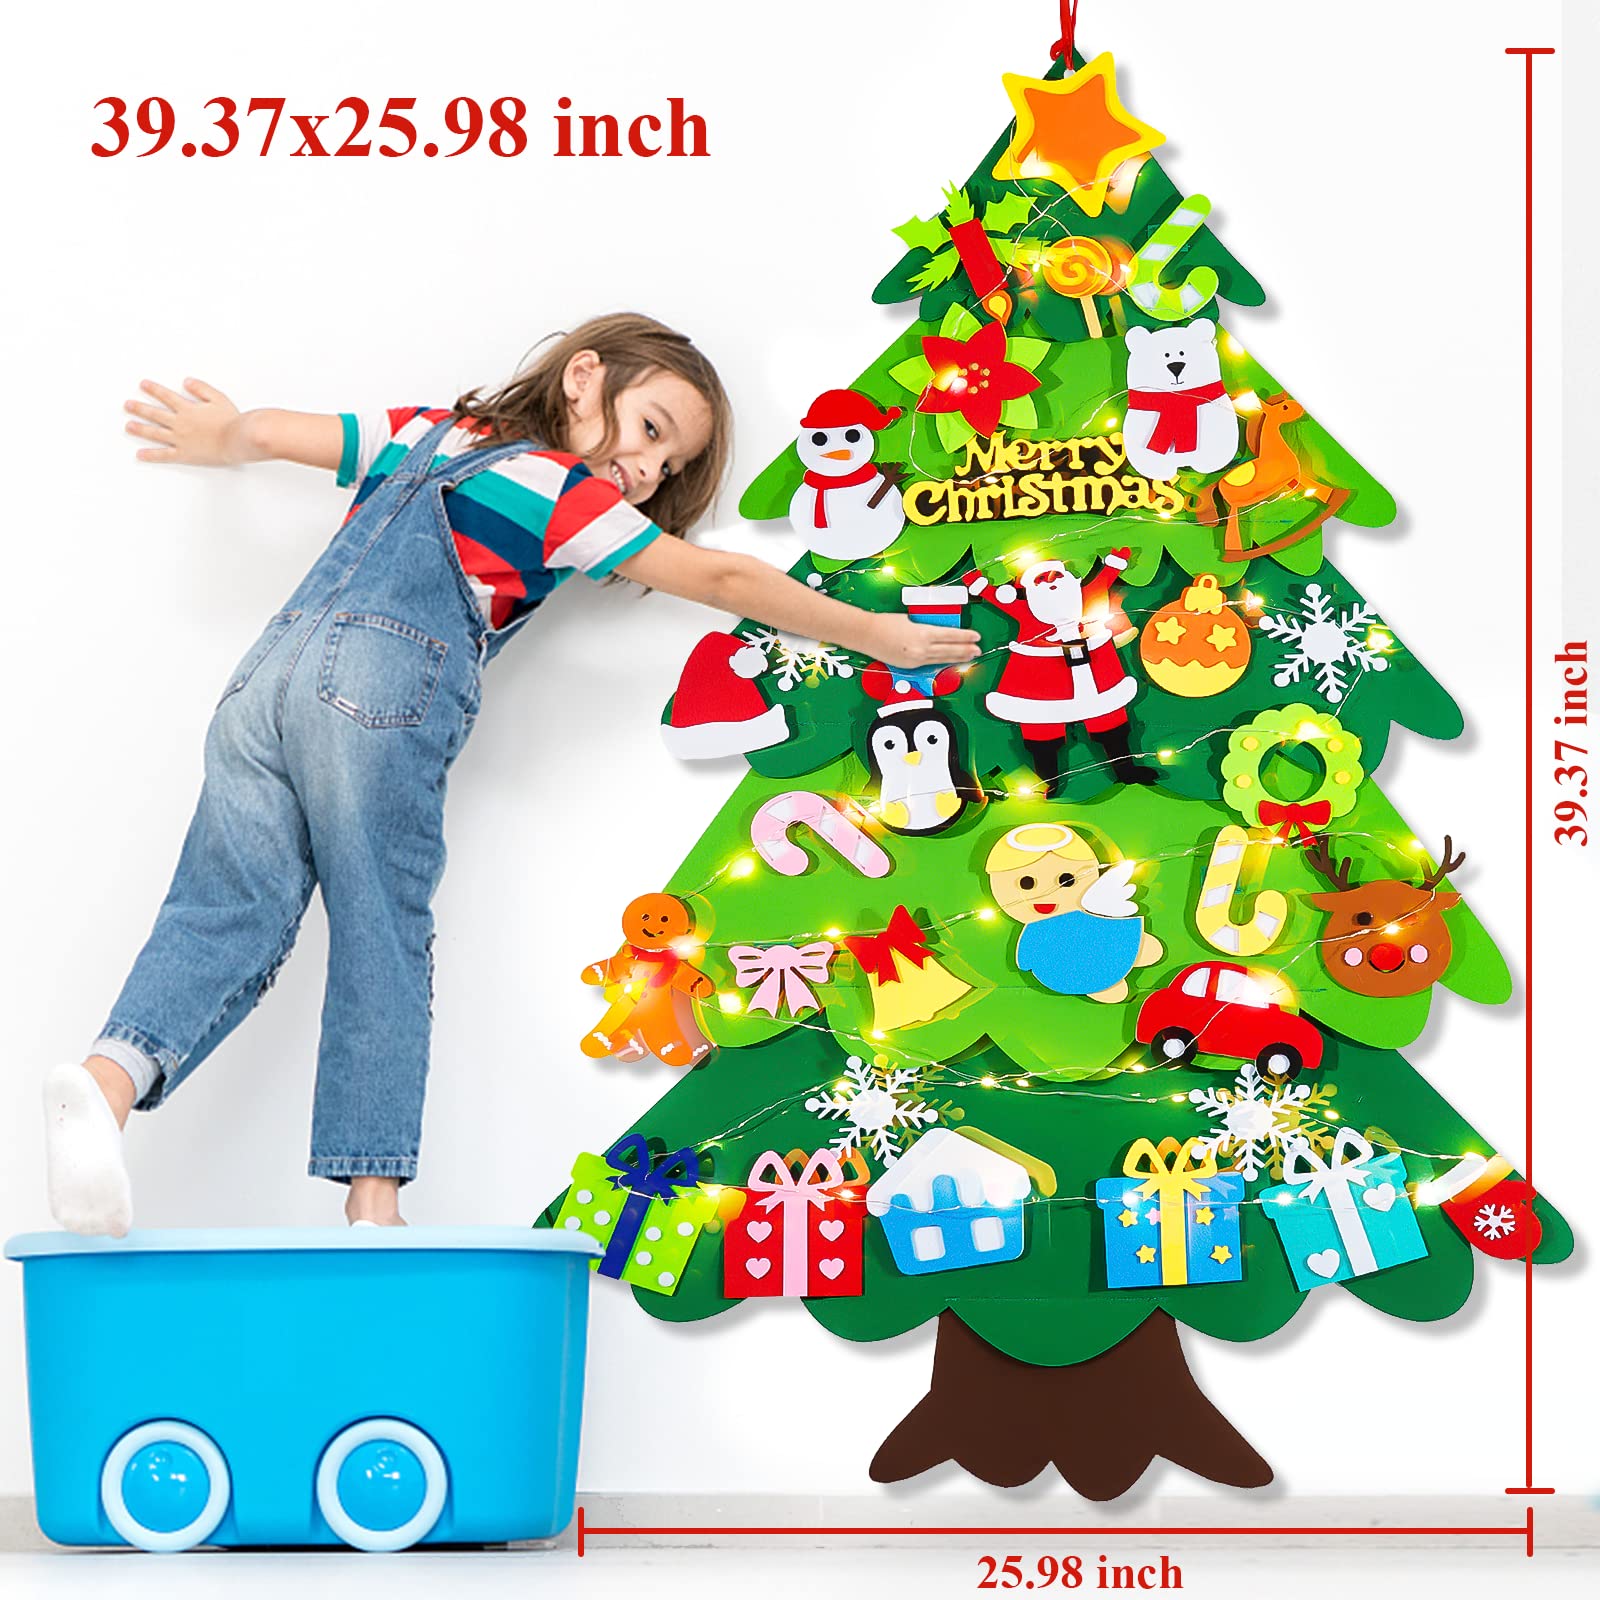 RVZHI Felt Christmas Tree for Kids Wall with Lights 33pcs Ornaments DIY Felt Christmas Tree for Toddlers with Exquisite Poster, Kids Gift Felt Wall Xmas Tree Kit Set for Toddlers Home Door Decoration